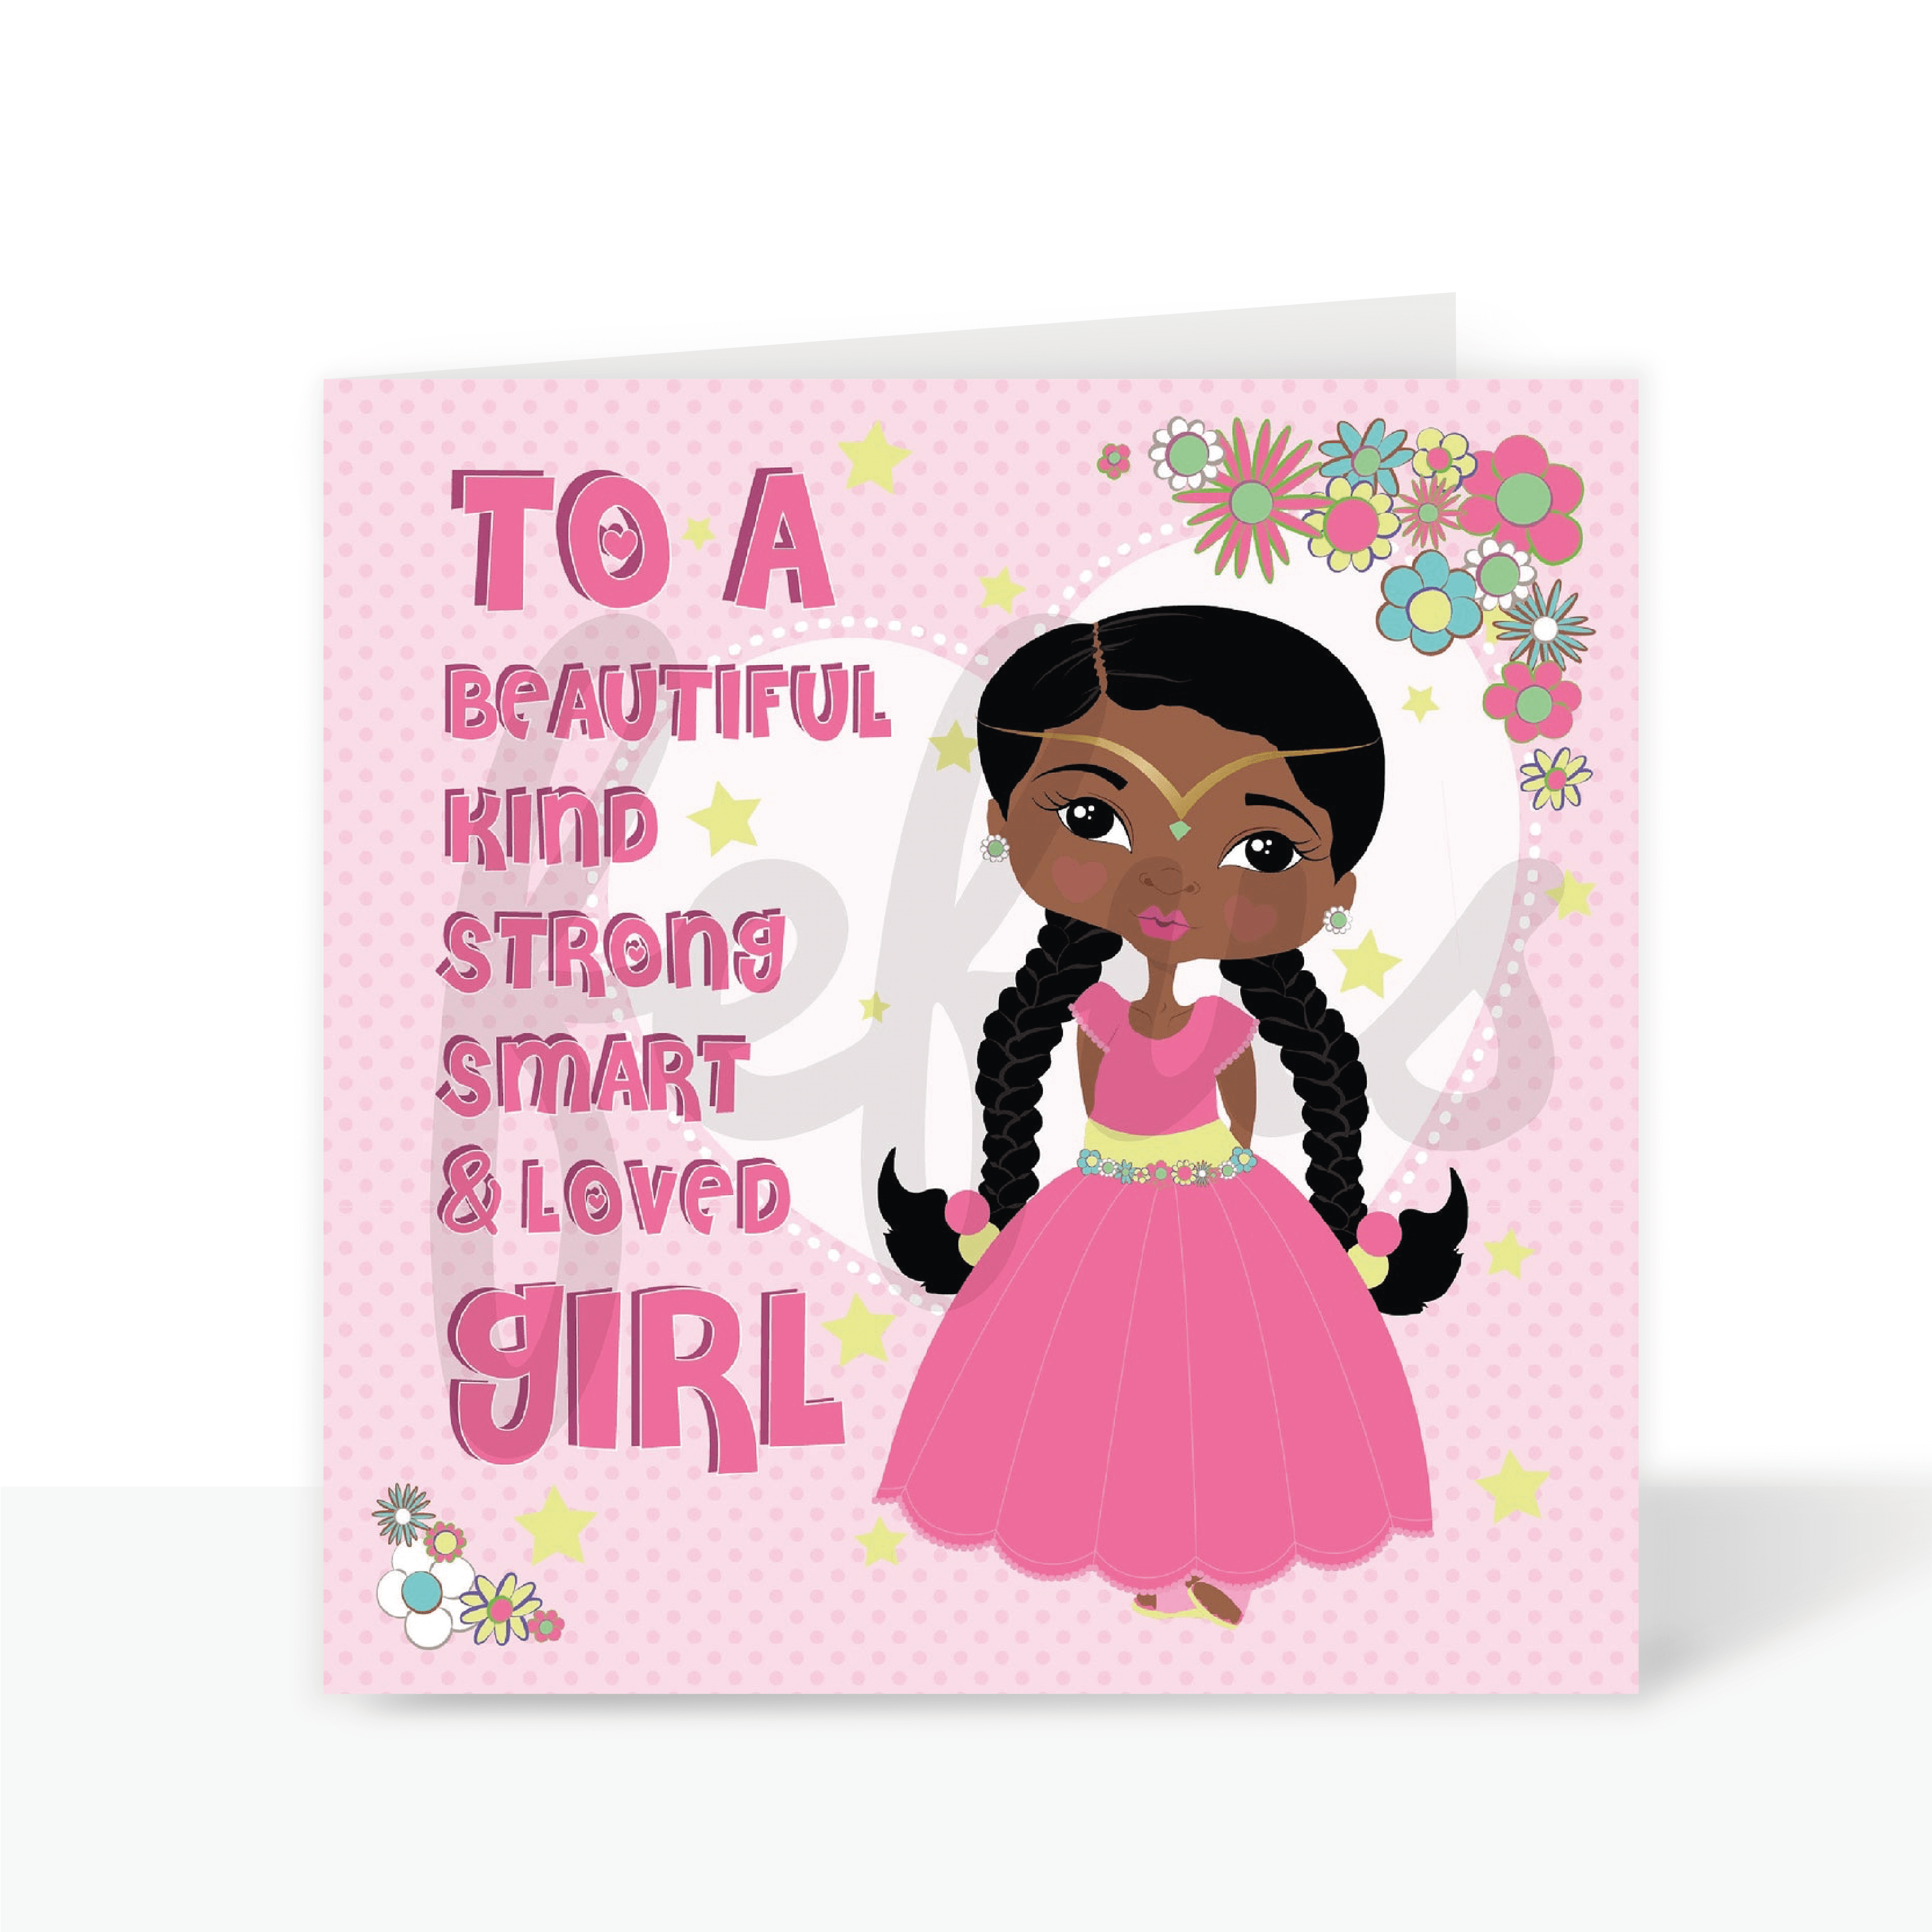 A birthday card featuring a Black girl dressed as a princess against a pink background